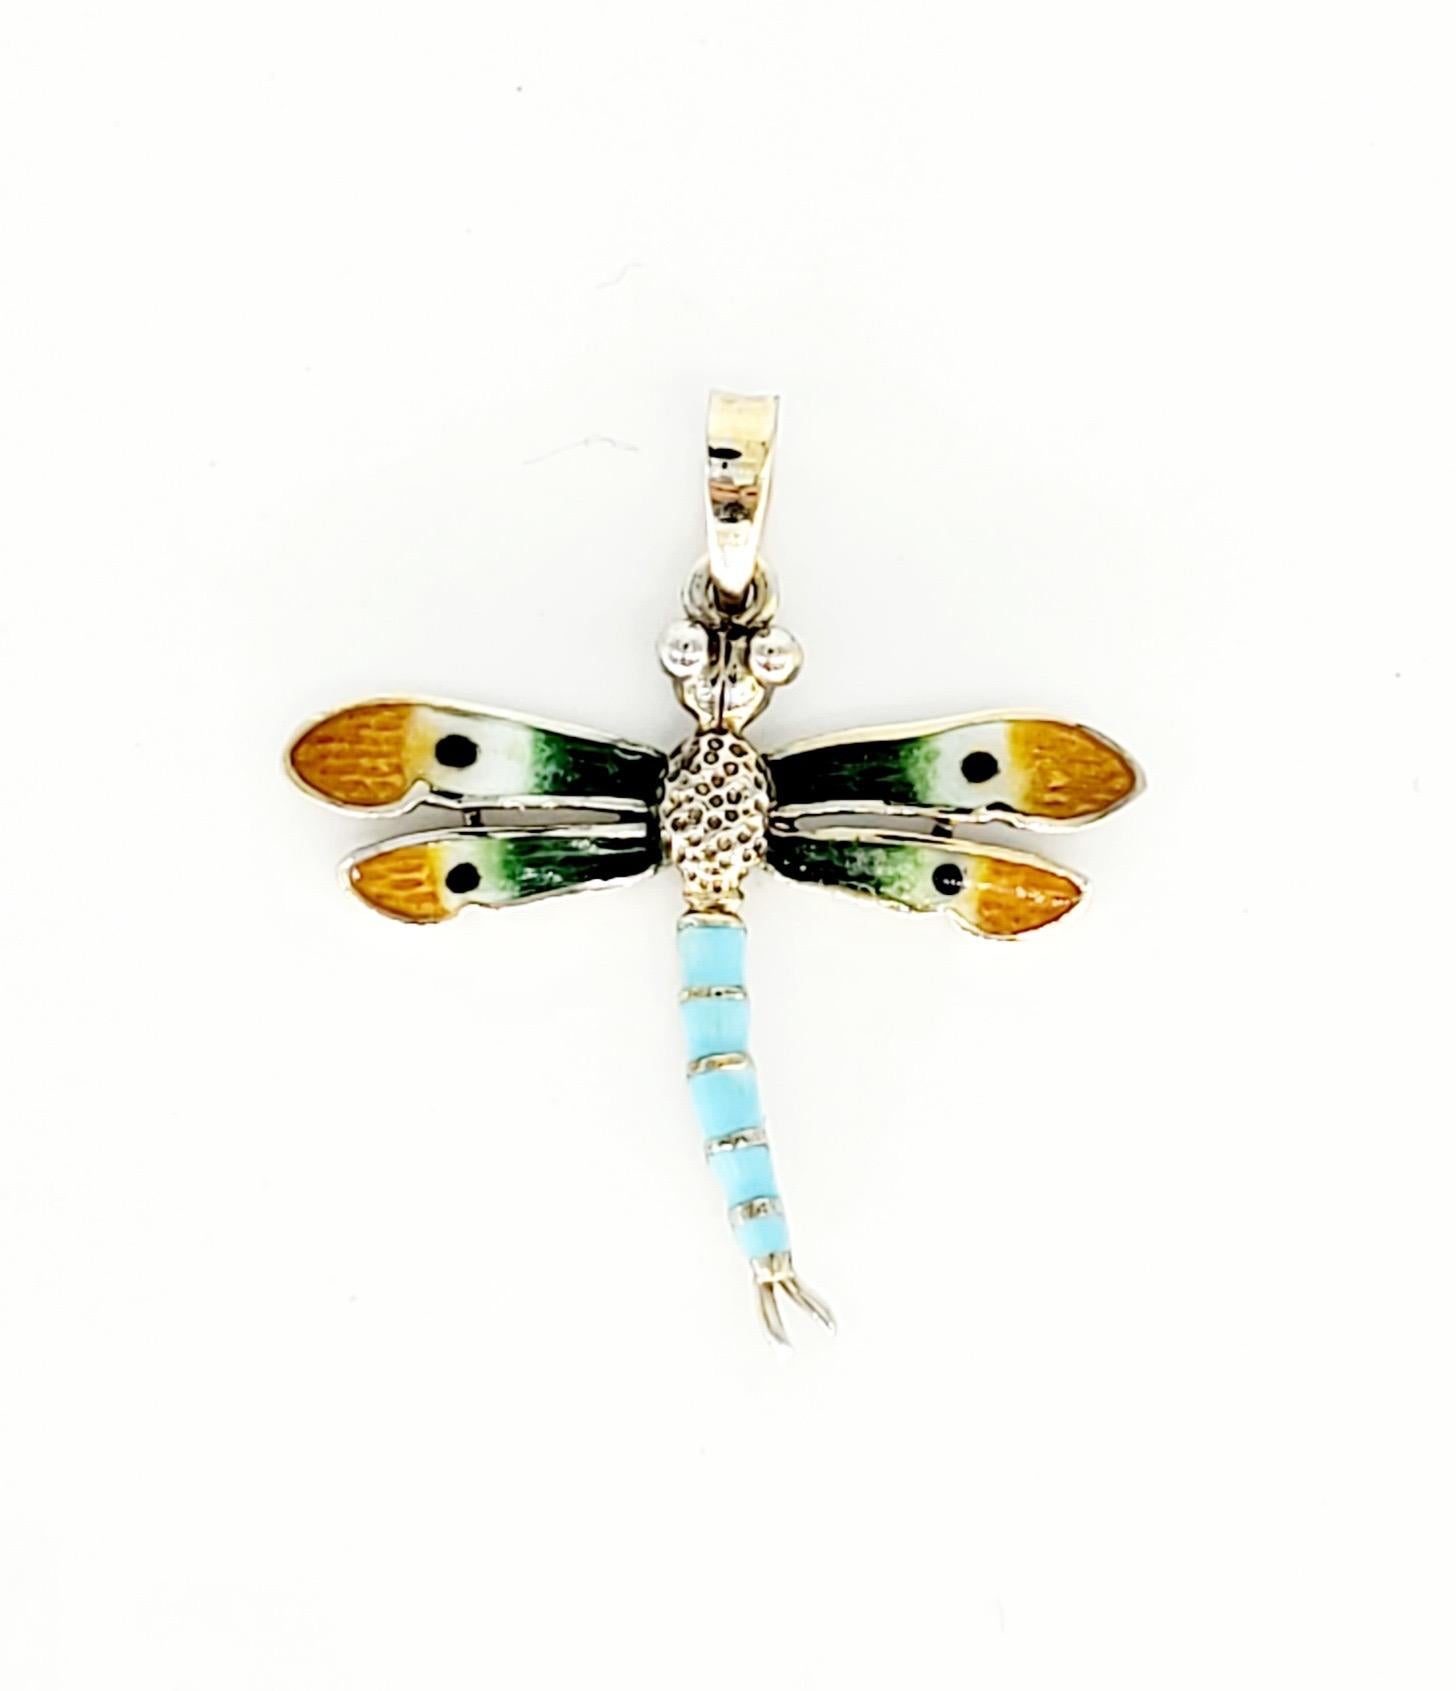 Vintage Enameled Turquoise Dragonfly Pendant. The pendant measures 1.15”x1.23” and weights 2.9 grams.